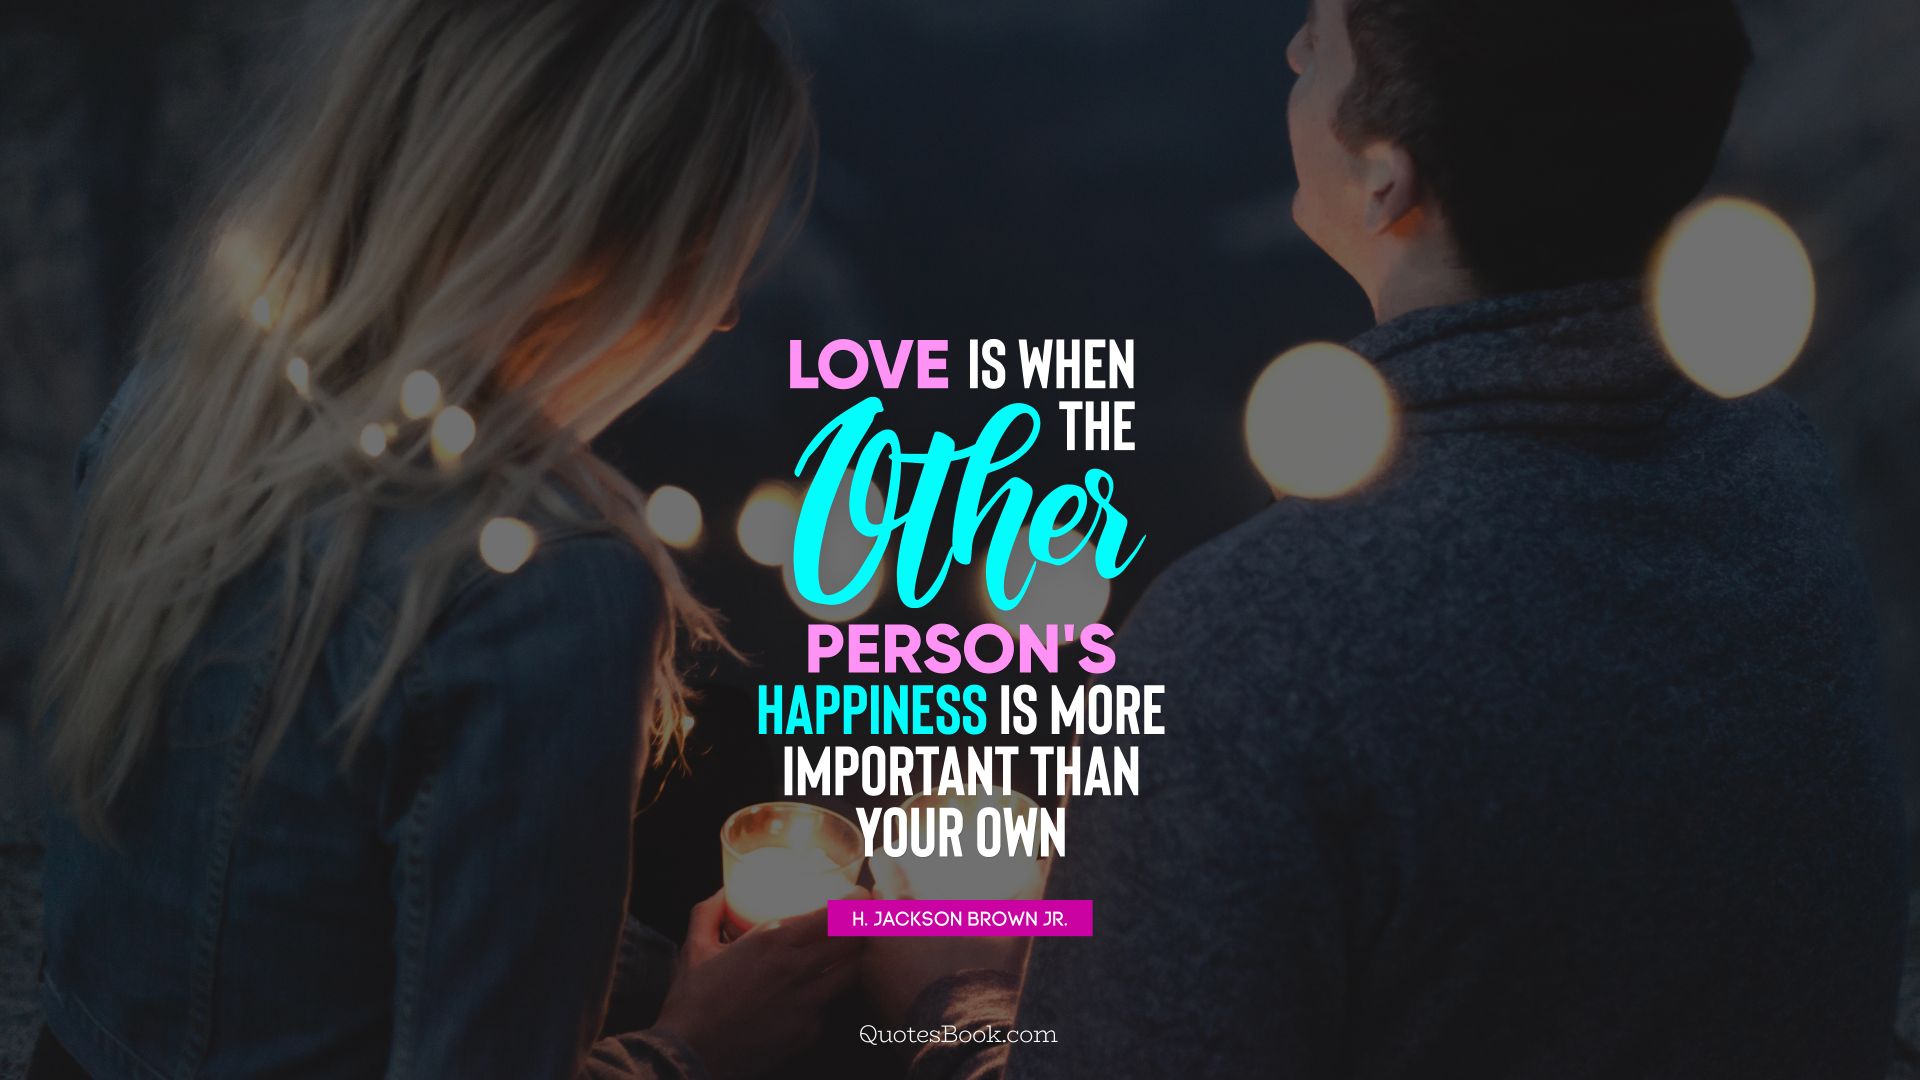 Love is when the other person's happiness is more important than your own. - Quote by H. Jackson Brown, Jr.